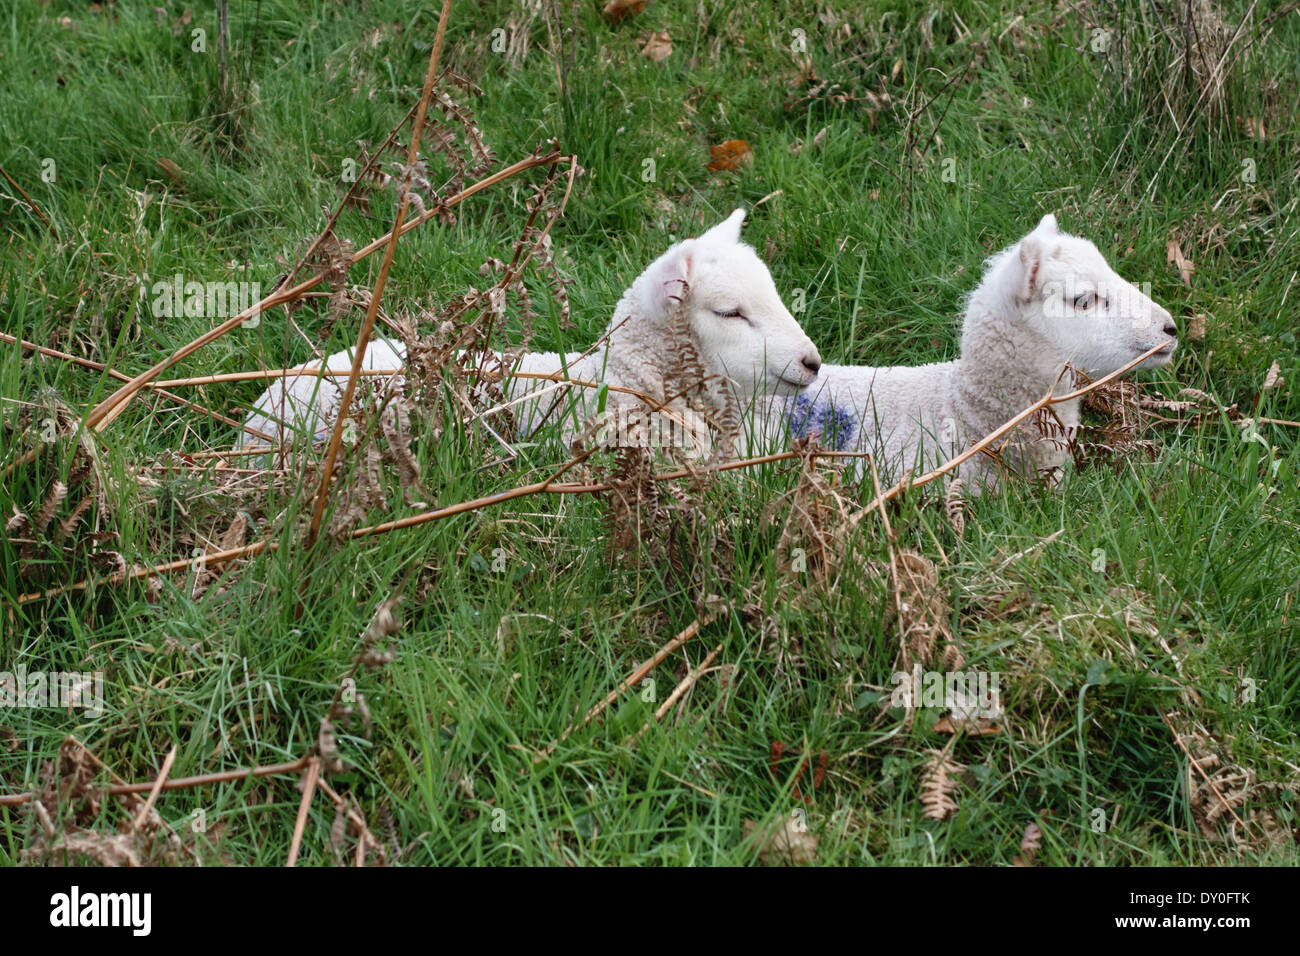 Lambs in spring, Wales, UK Stock Photo